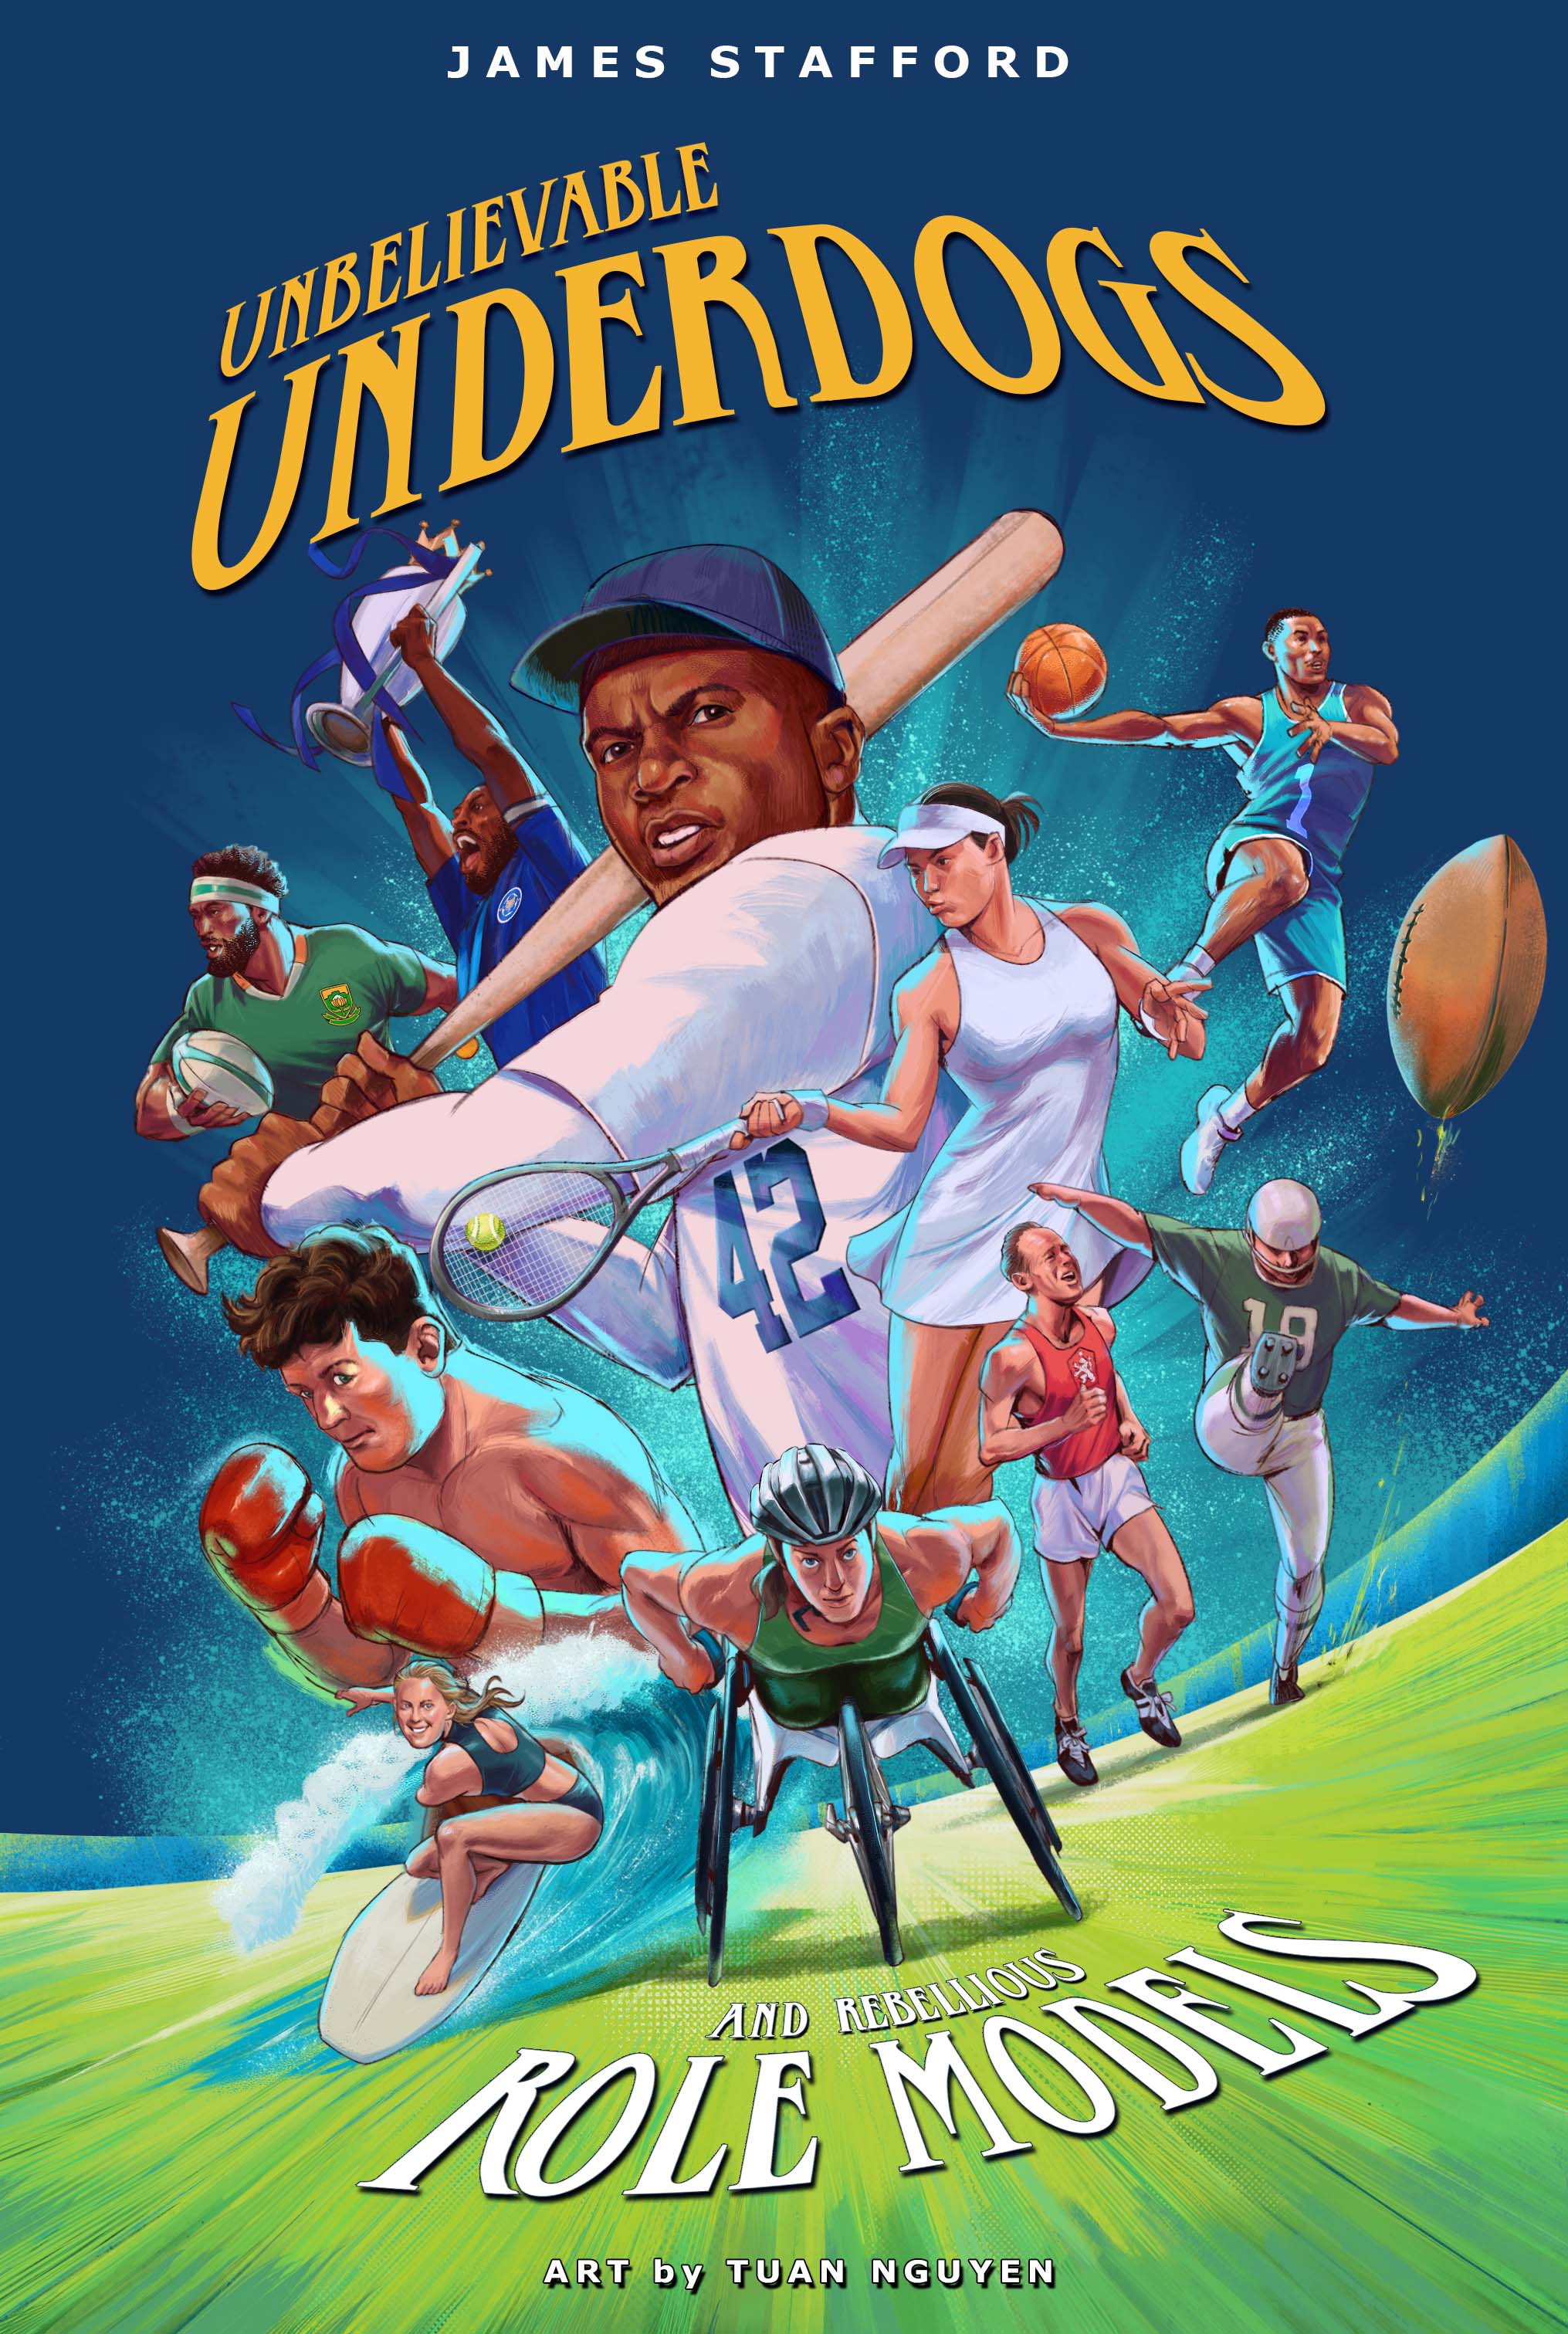 Unbelievable_Underdogs_Cover_front_for_web